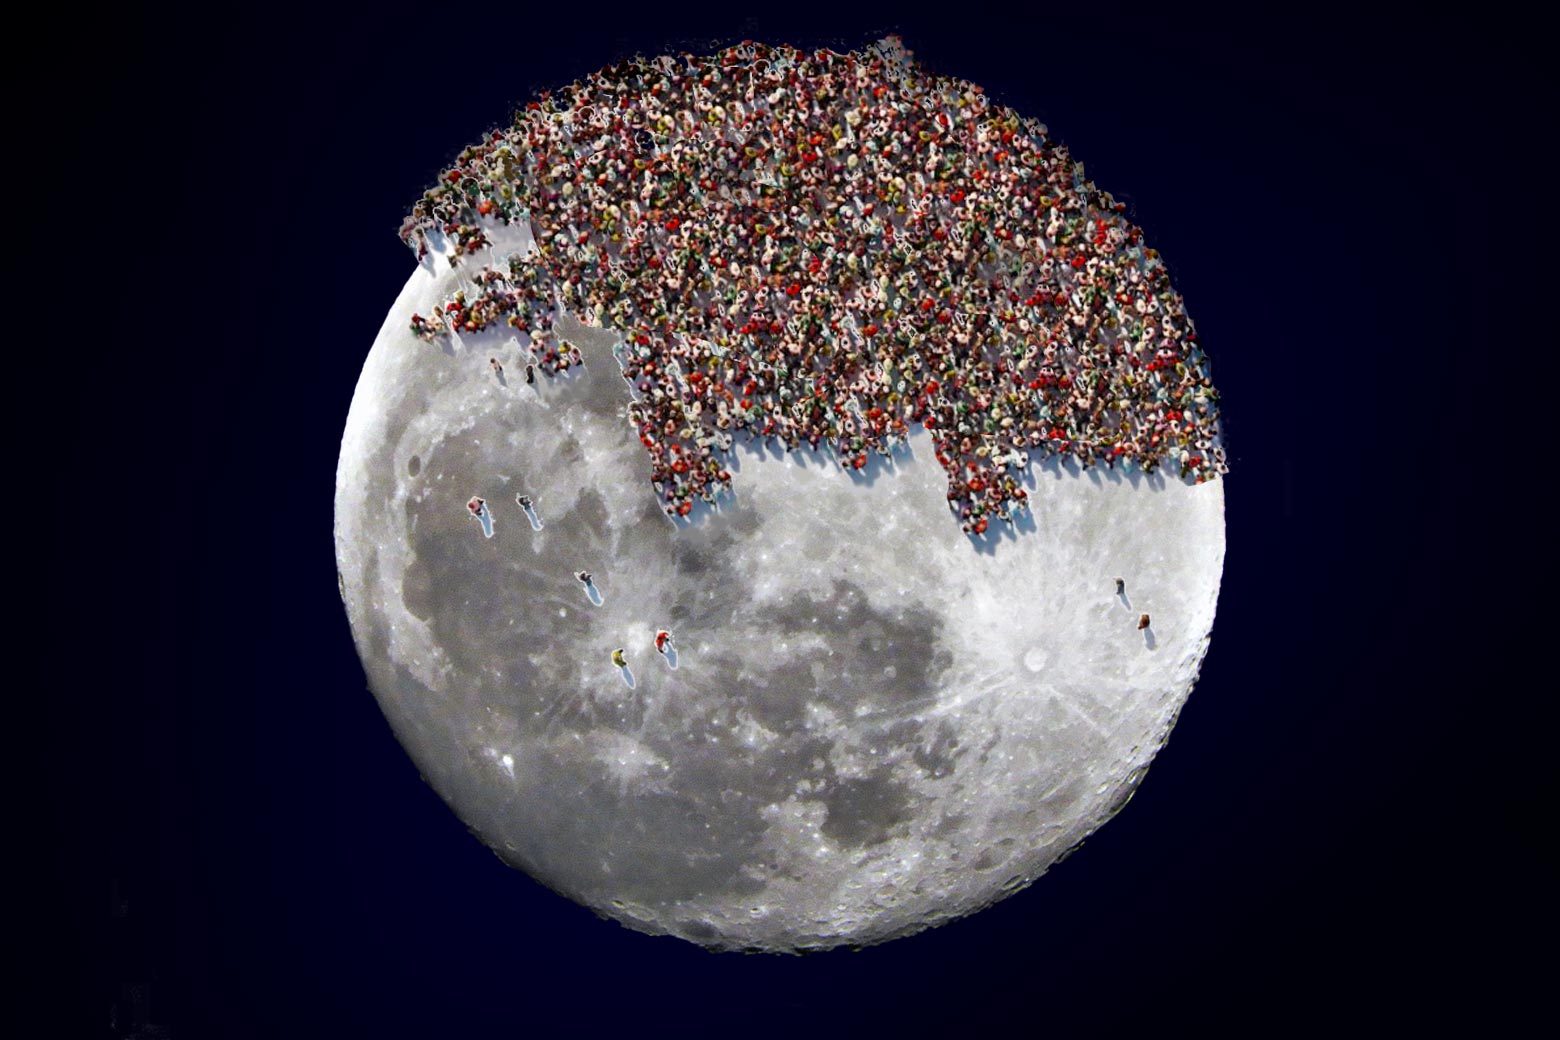 A photo of the moon, overlaid with tiny flags crowding its surface.